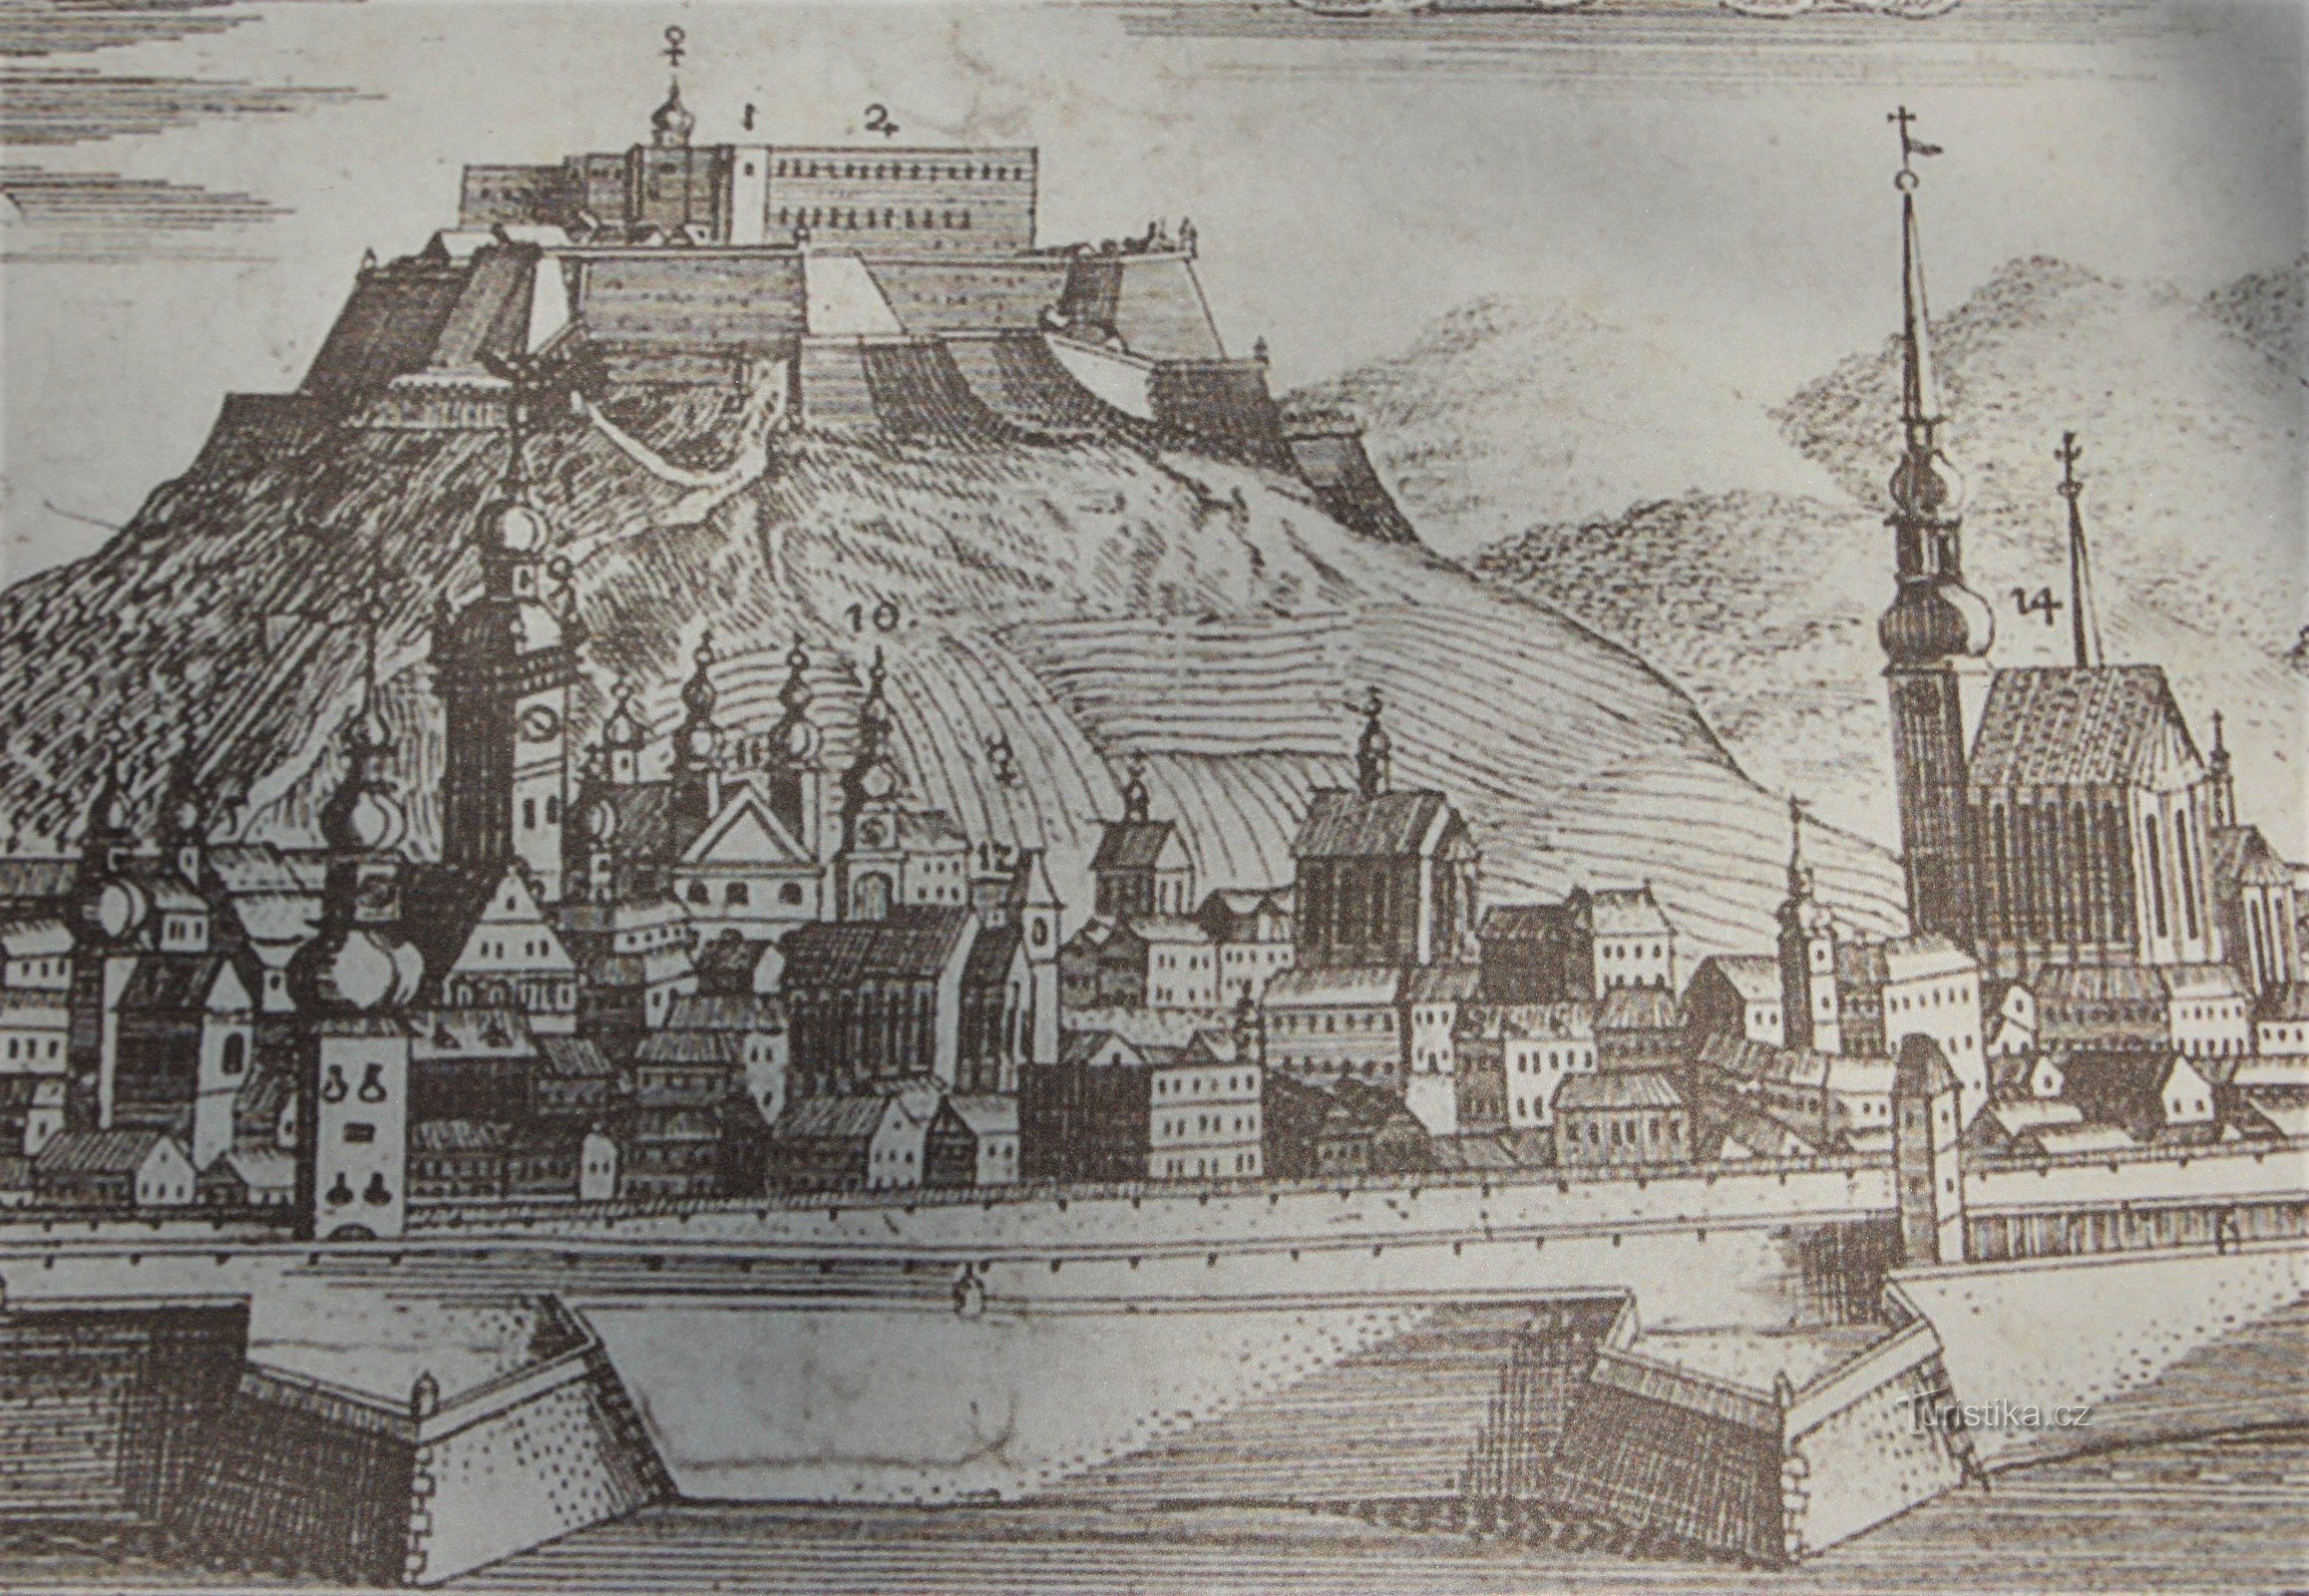 Contemporary drawing of the castle hill with vineyards from 1700